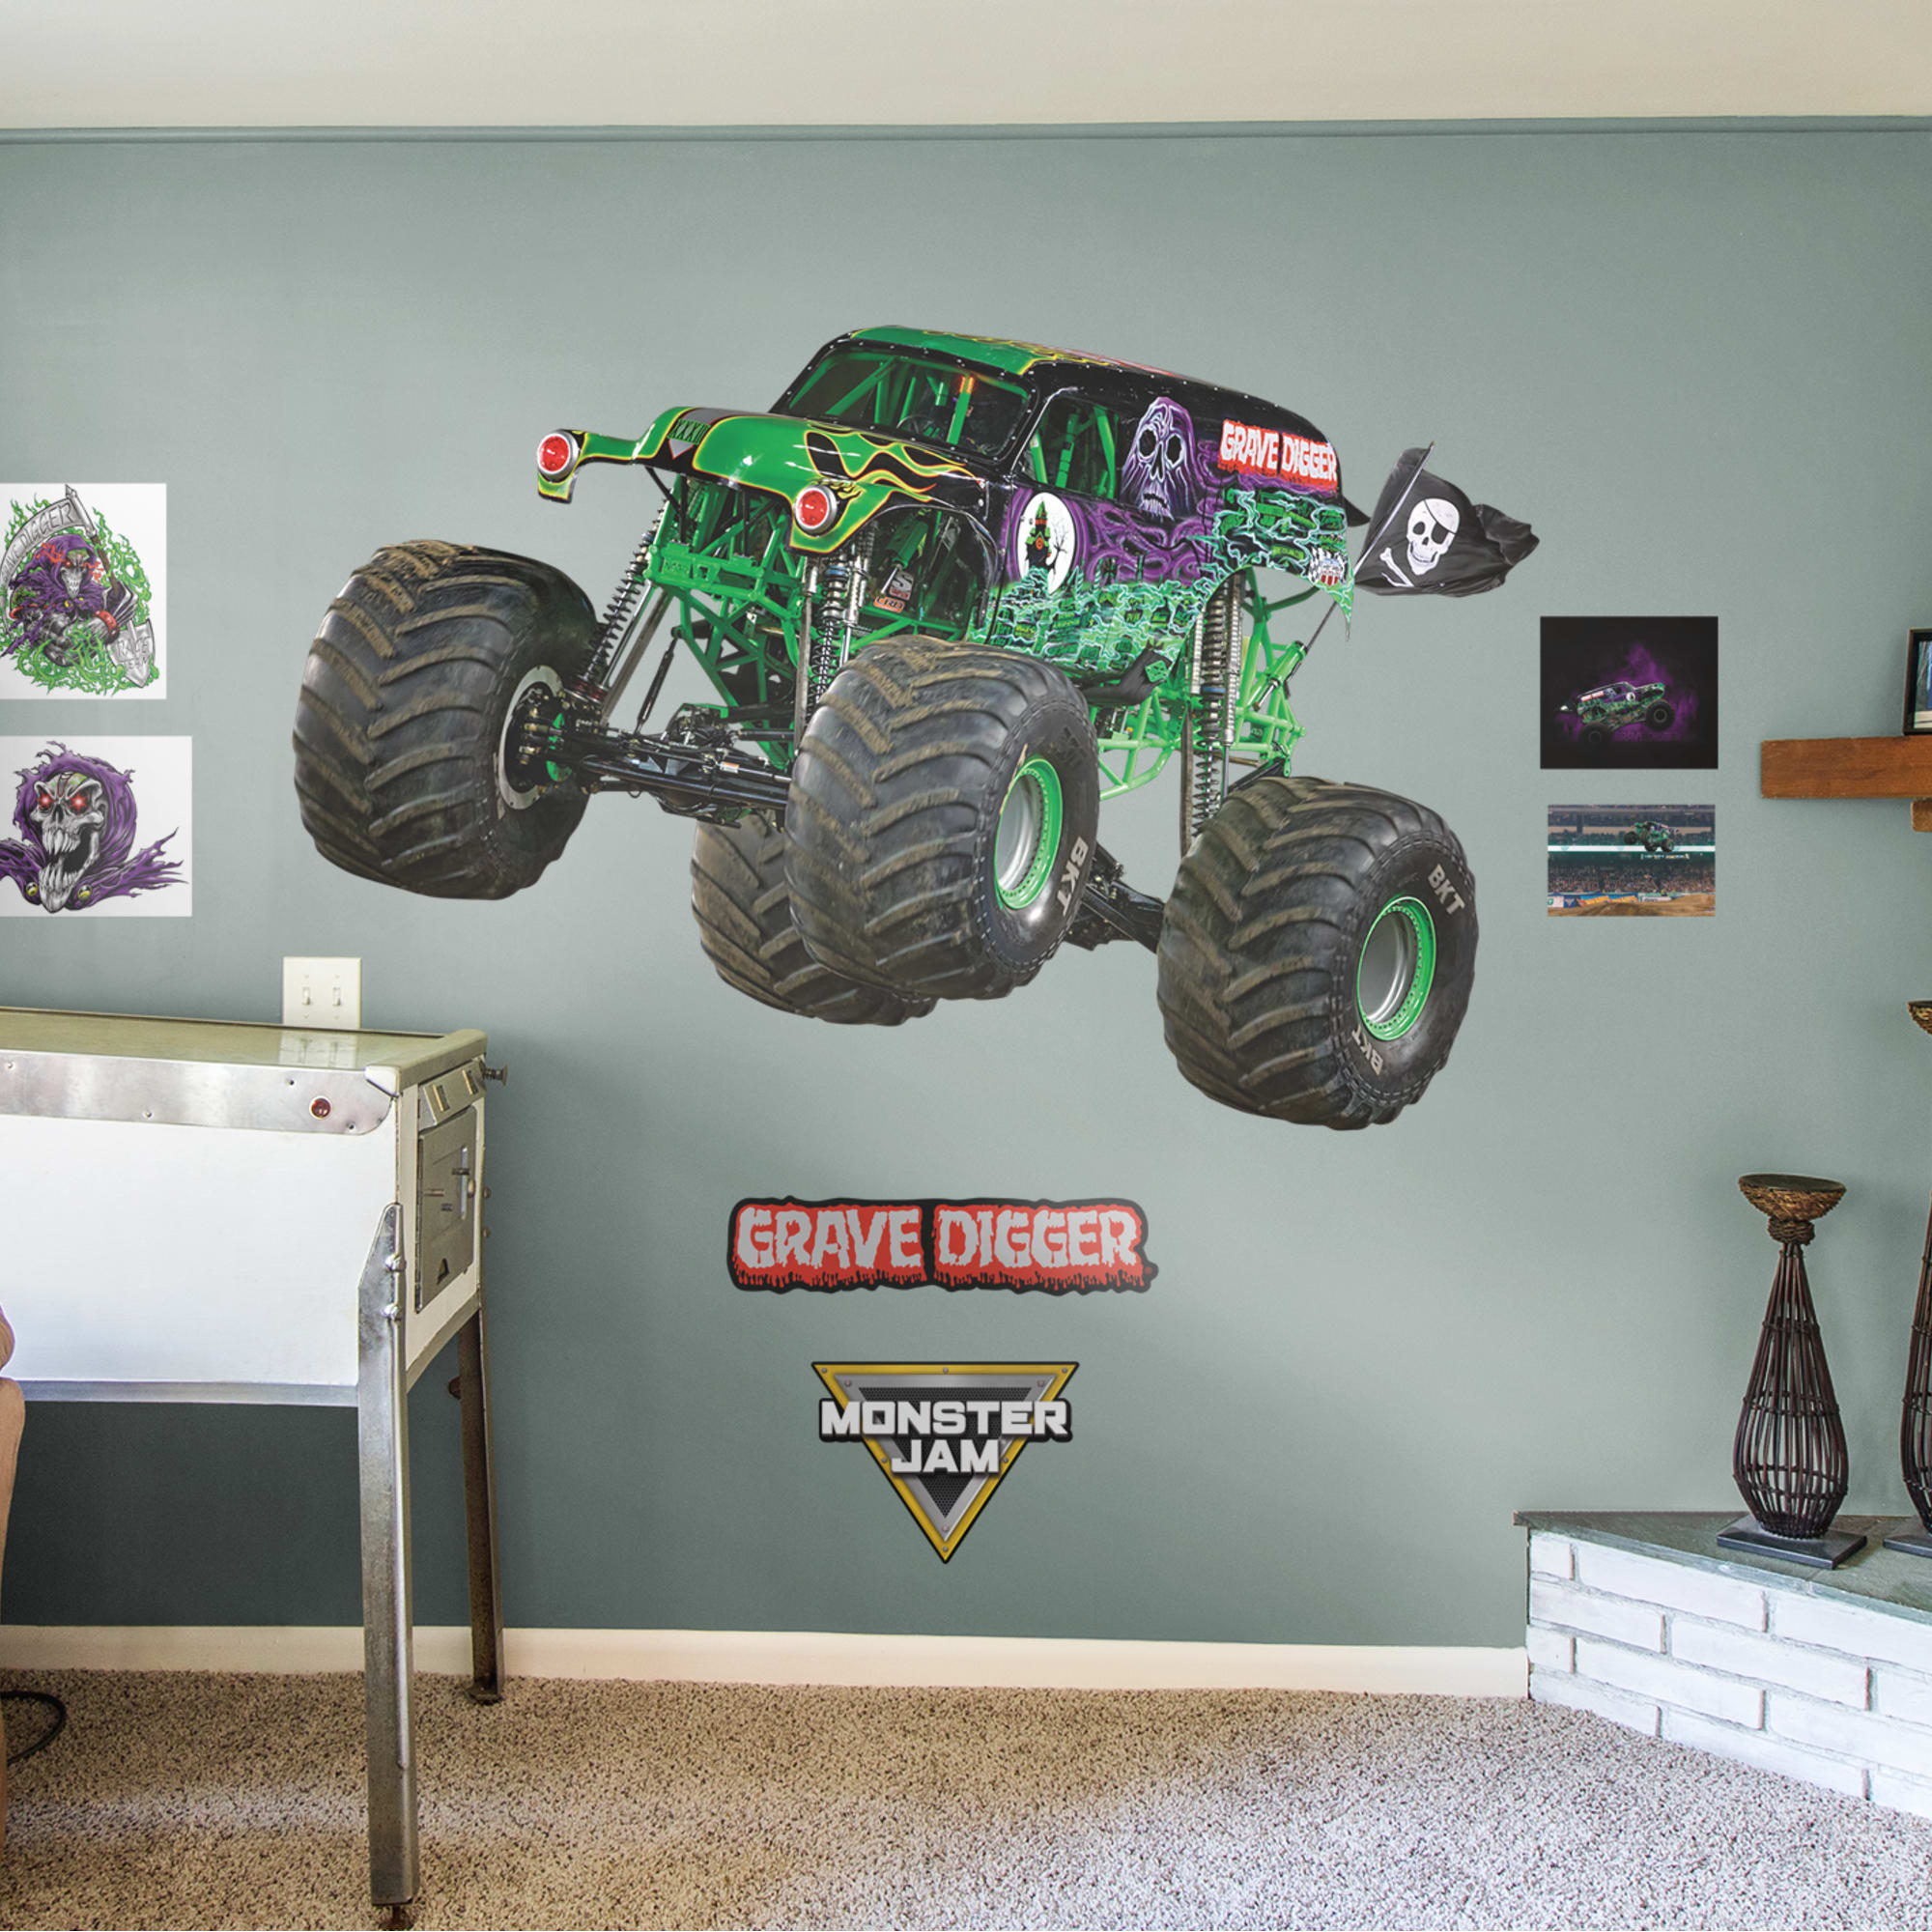 Grave Digger - Officially Licensed Monster Jam Removable Wall Decal Truck + 6 Monster Jam Decals (78"W x 51"H) by Fathead | Viny